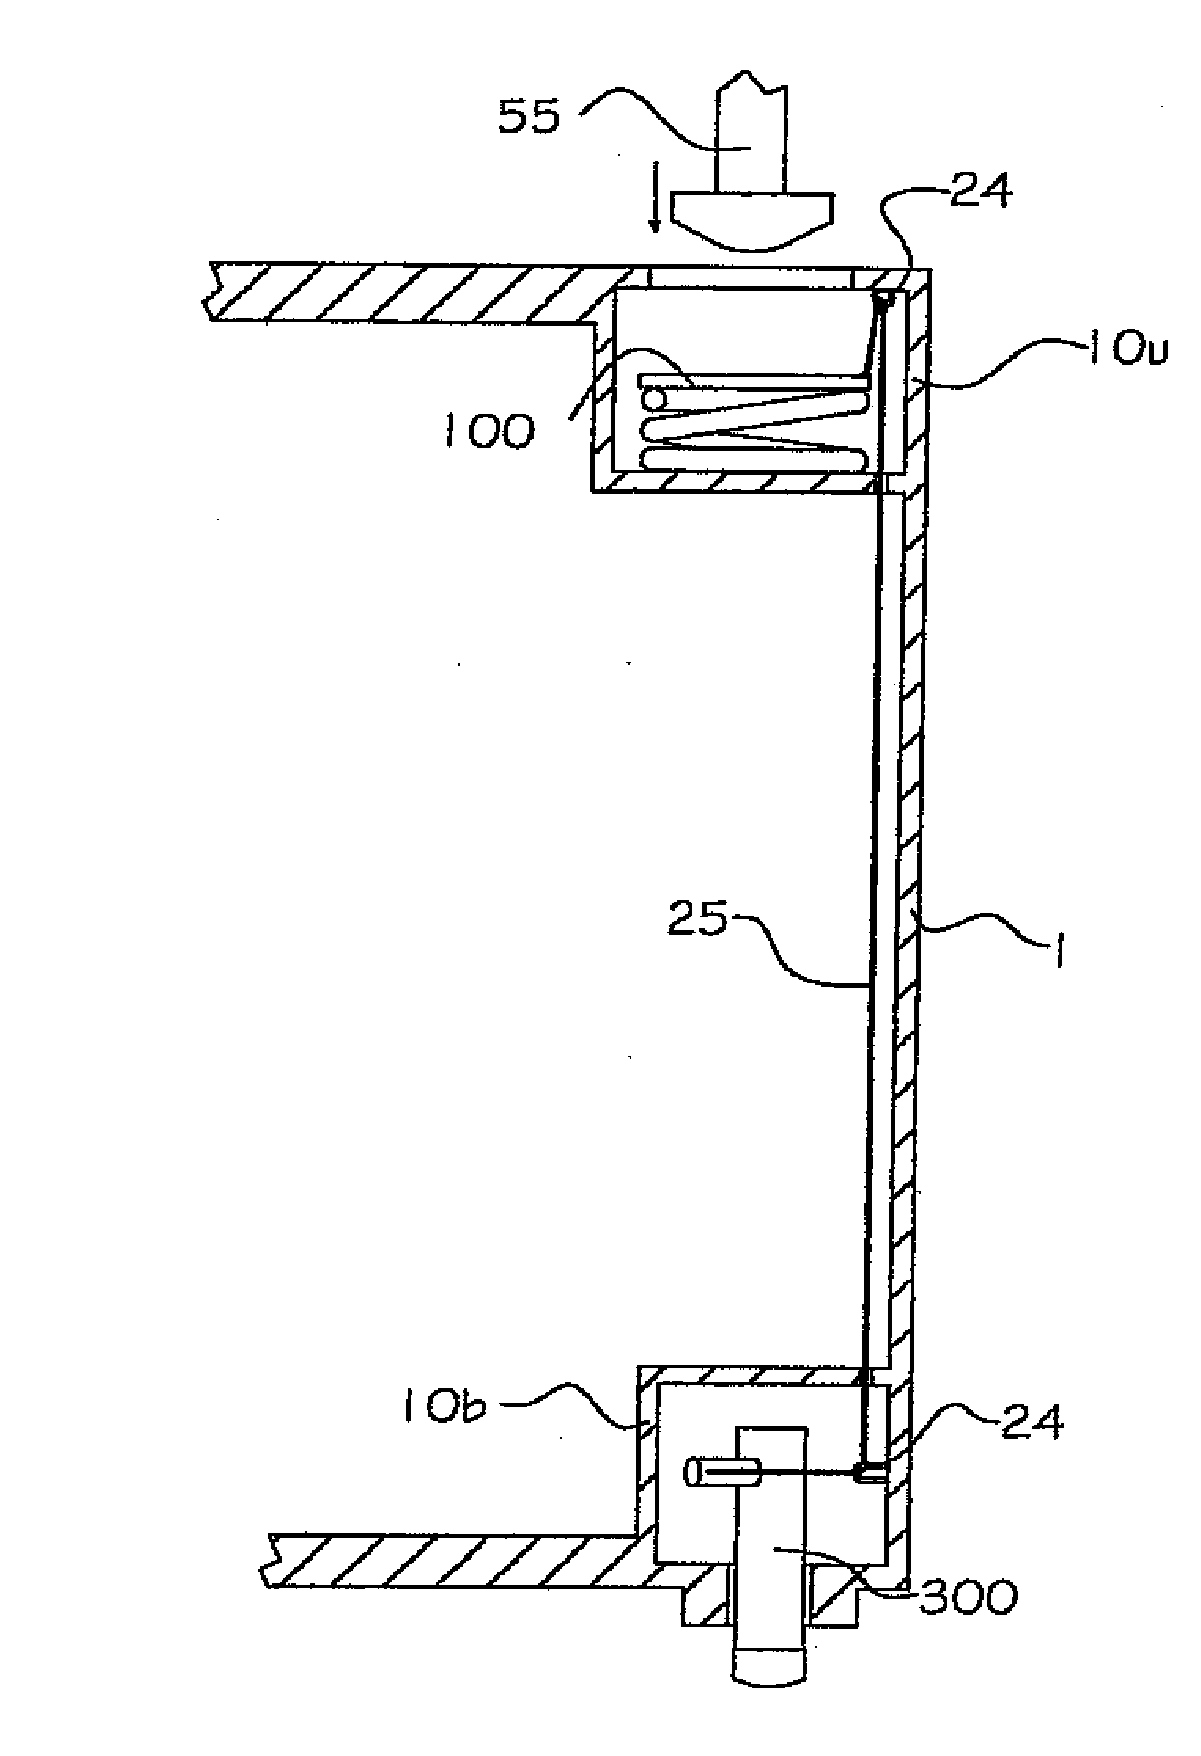 System for connecting and disconnecting containers from a base